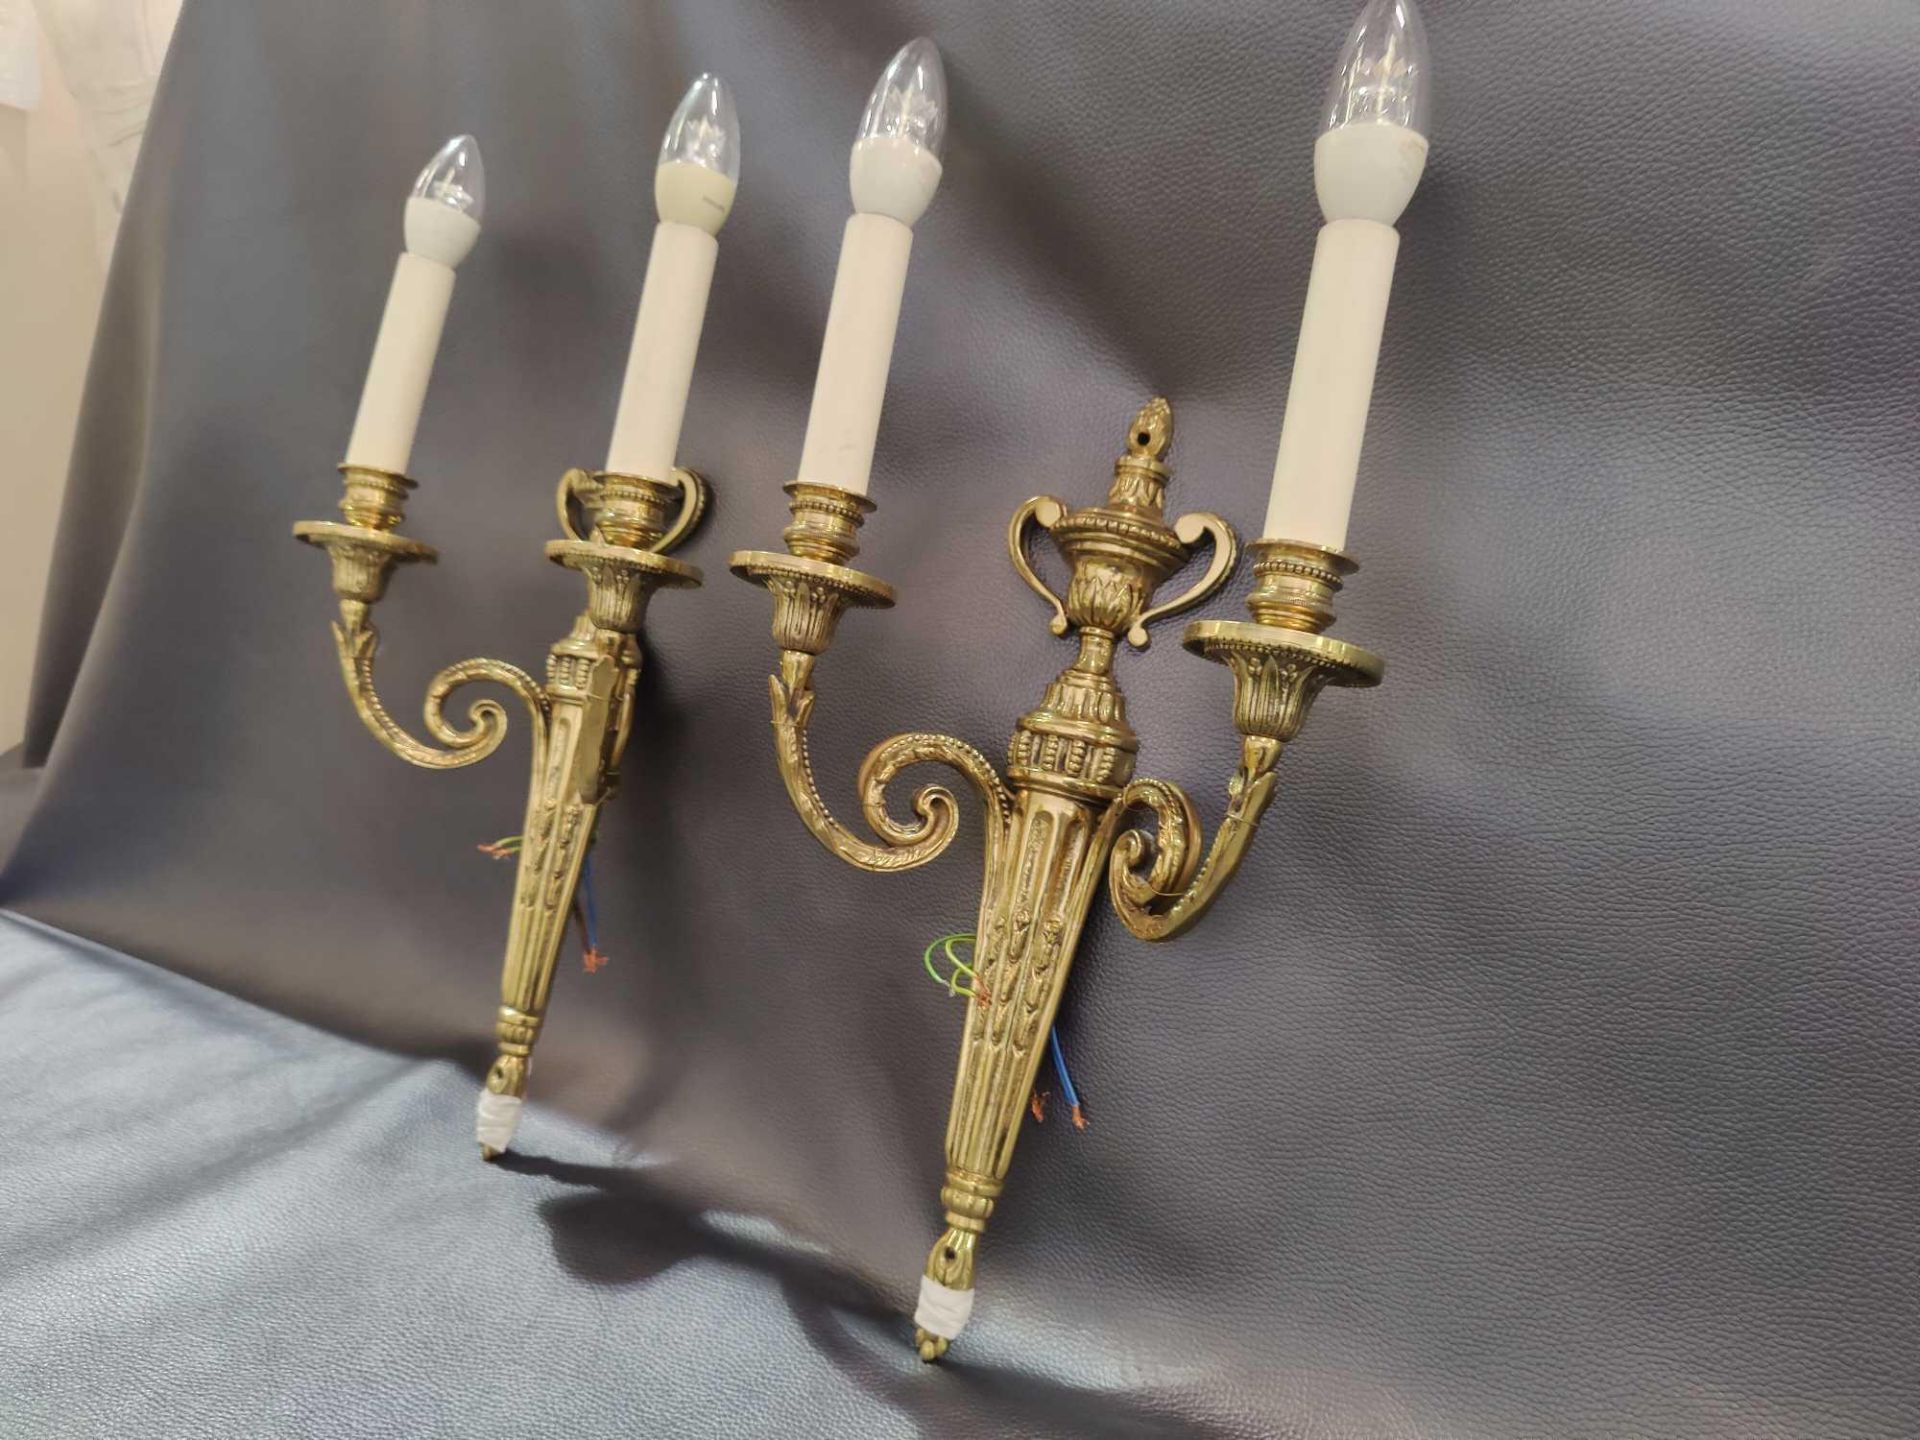 A Pair Of Wall Appliques Twin Leaf Capped Scroll Arms Issuing From A Well-Cast Single Decorative - Image 3 of 3